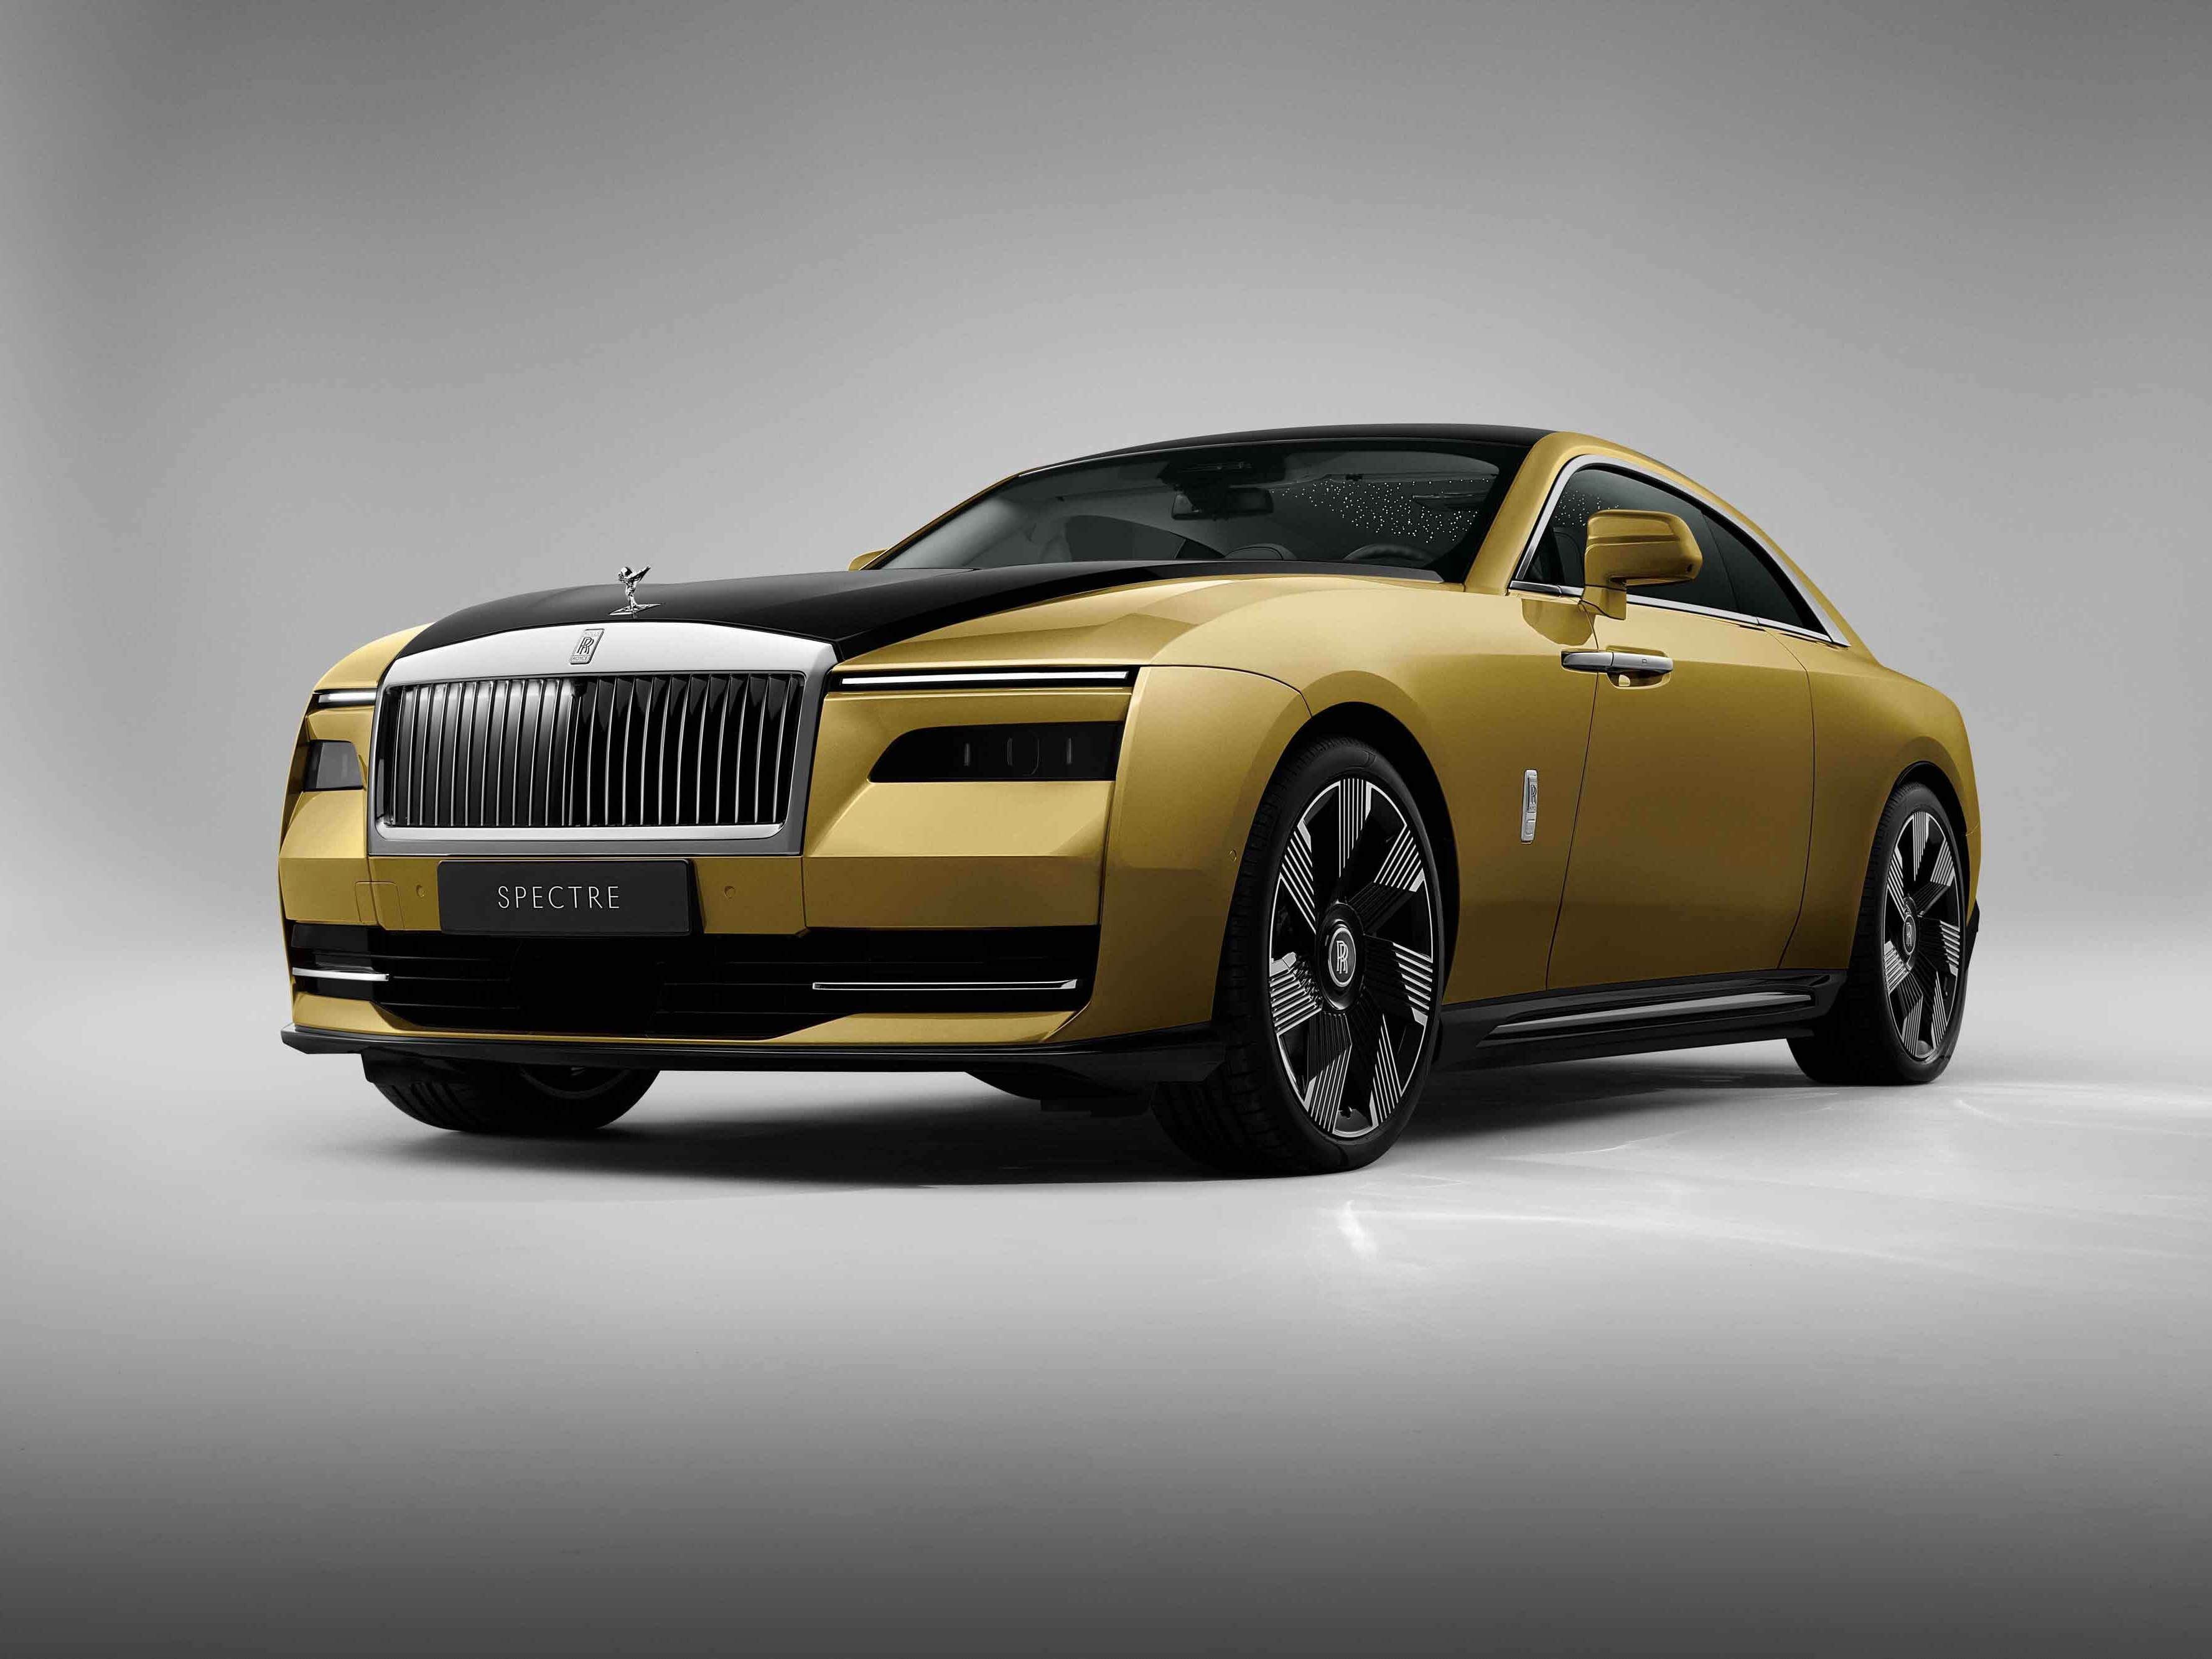 Rolls-Royce Spectre revealed as firm’s first electric car